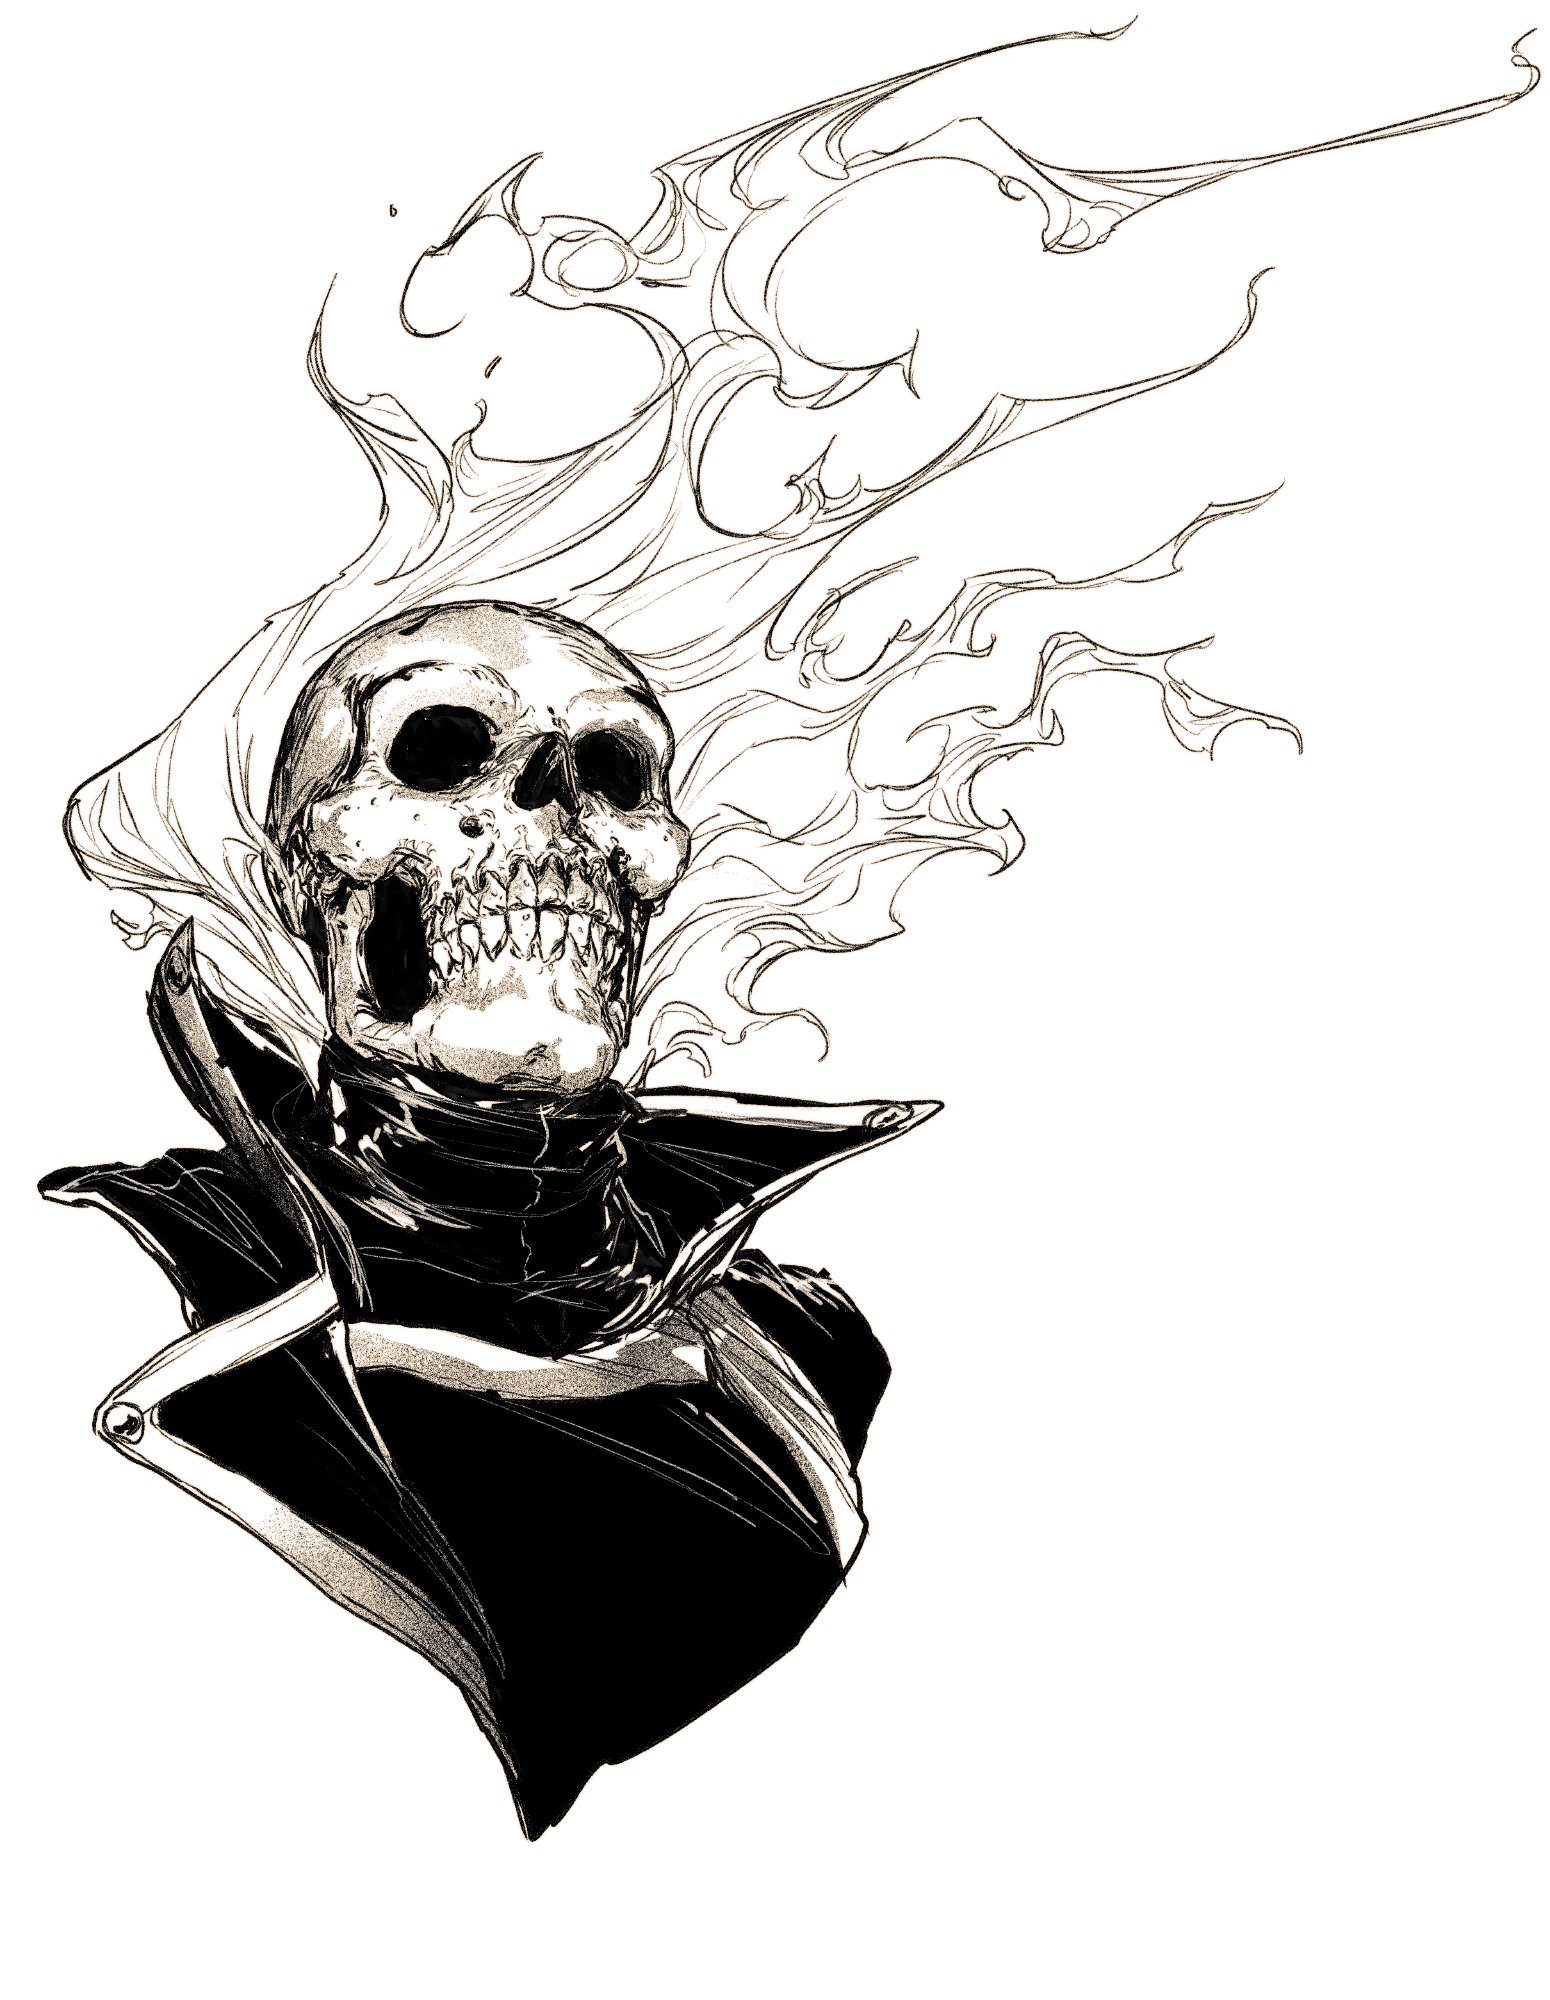 1578 Ghost Rider Images Stock Photos  Vectors  Shutterstock